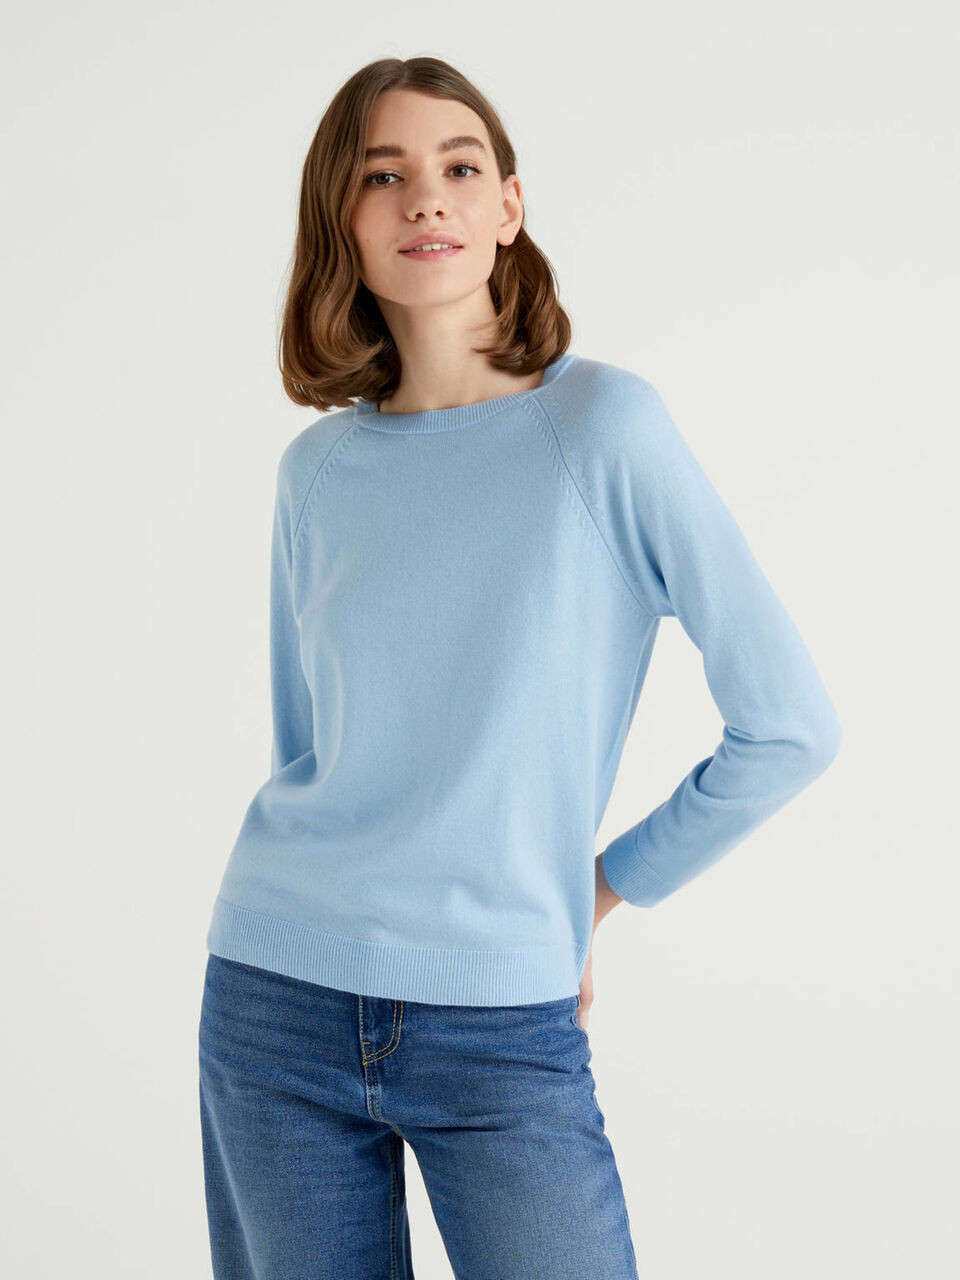 Light blue crew neck sweater in cashmere and wool blend